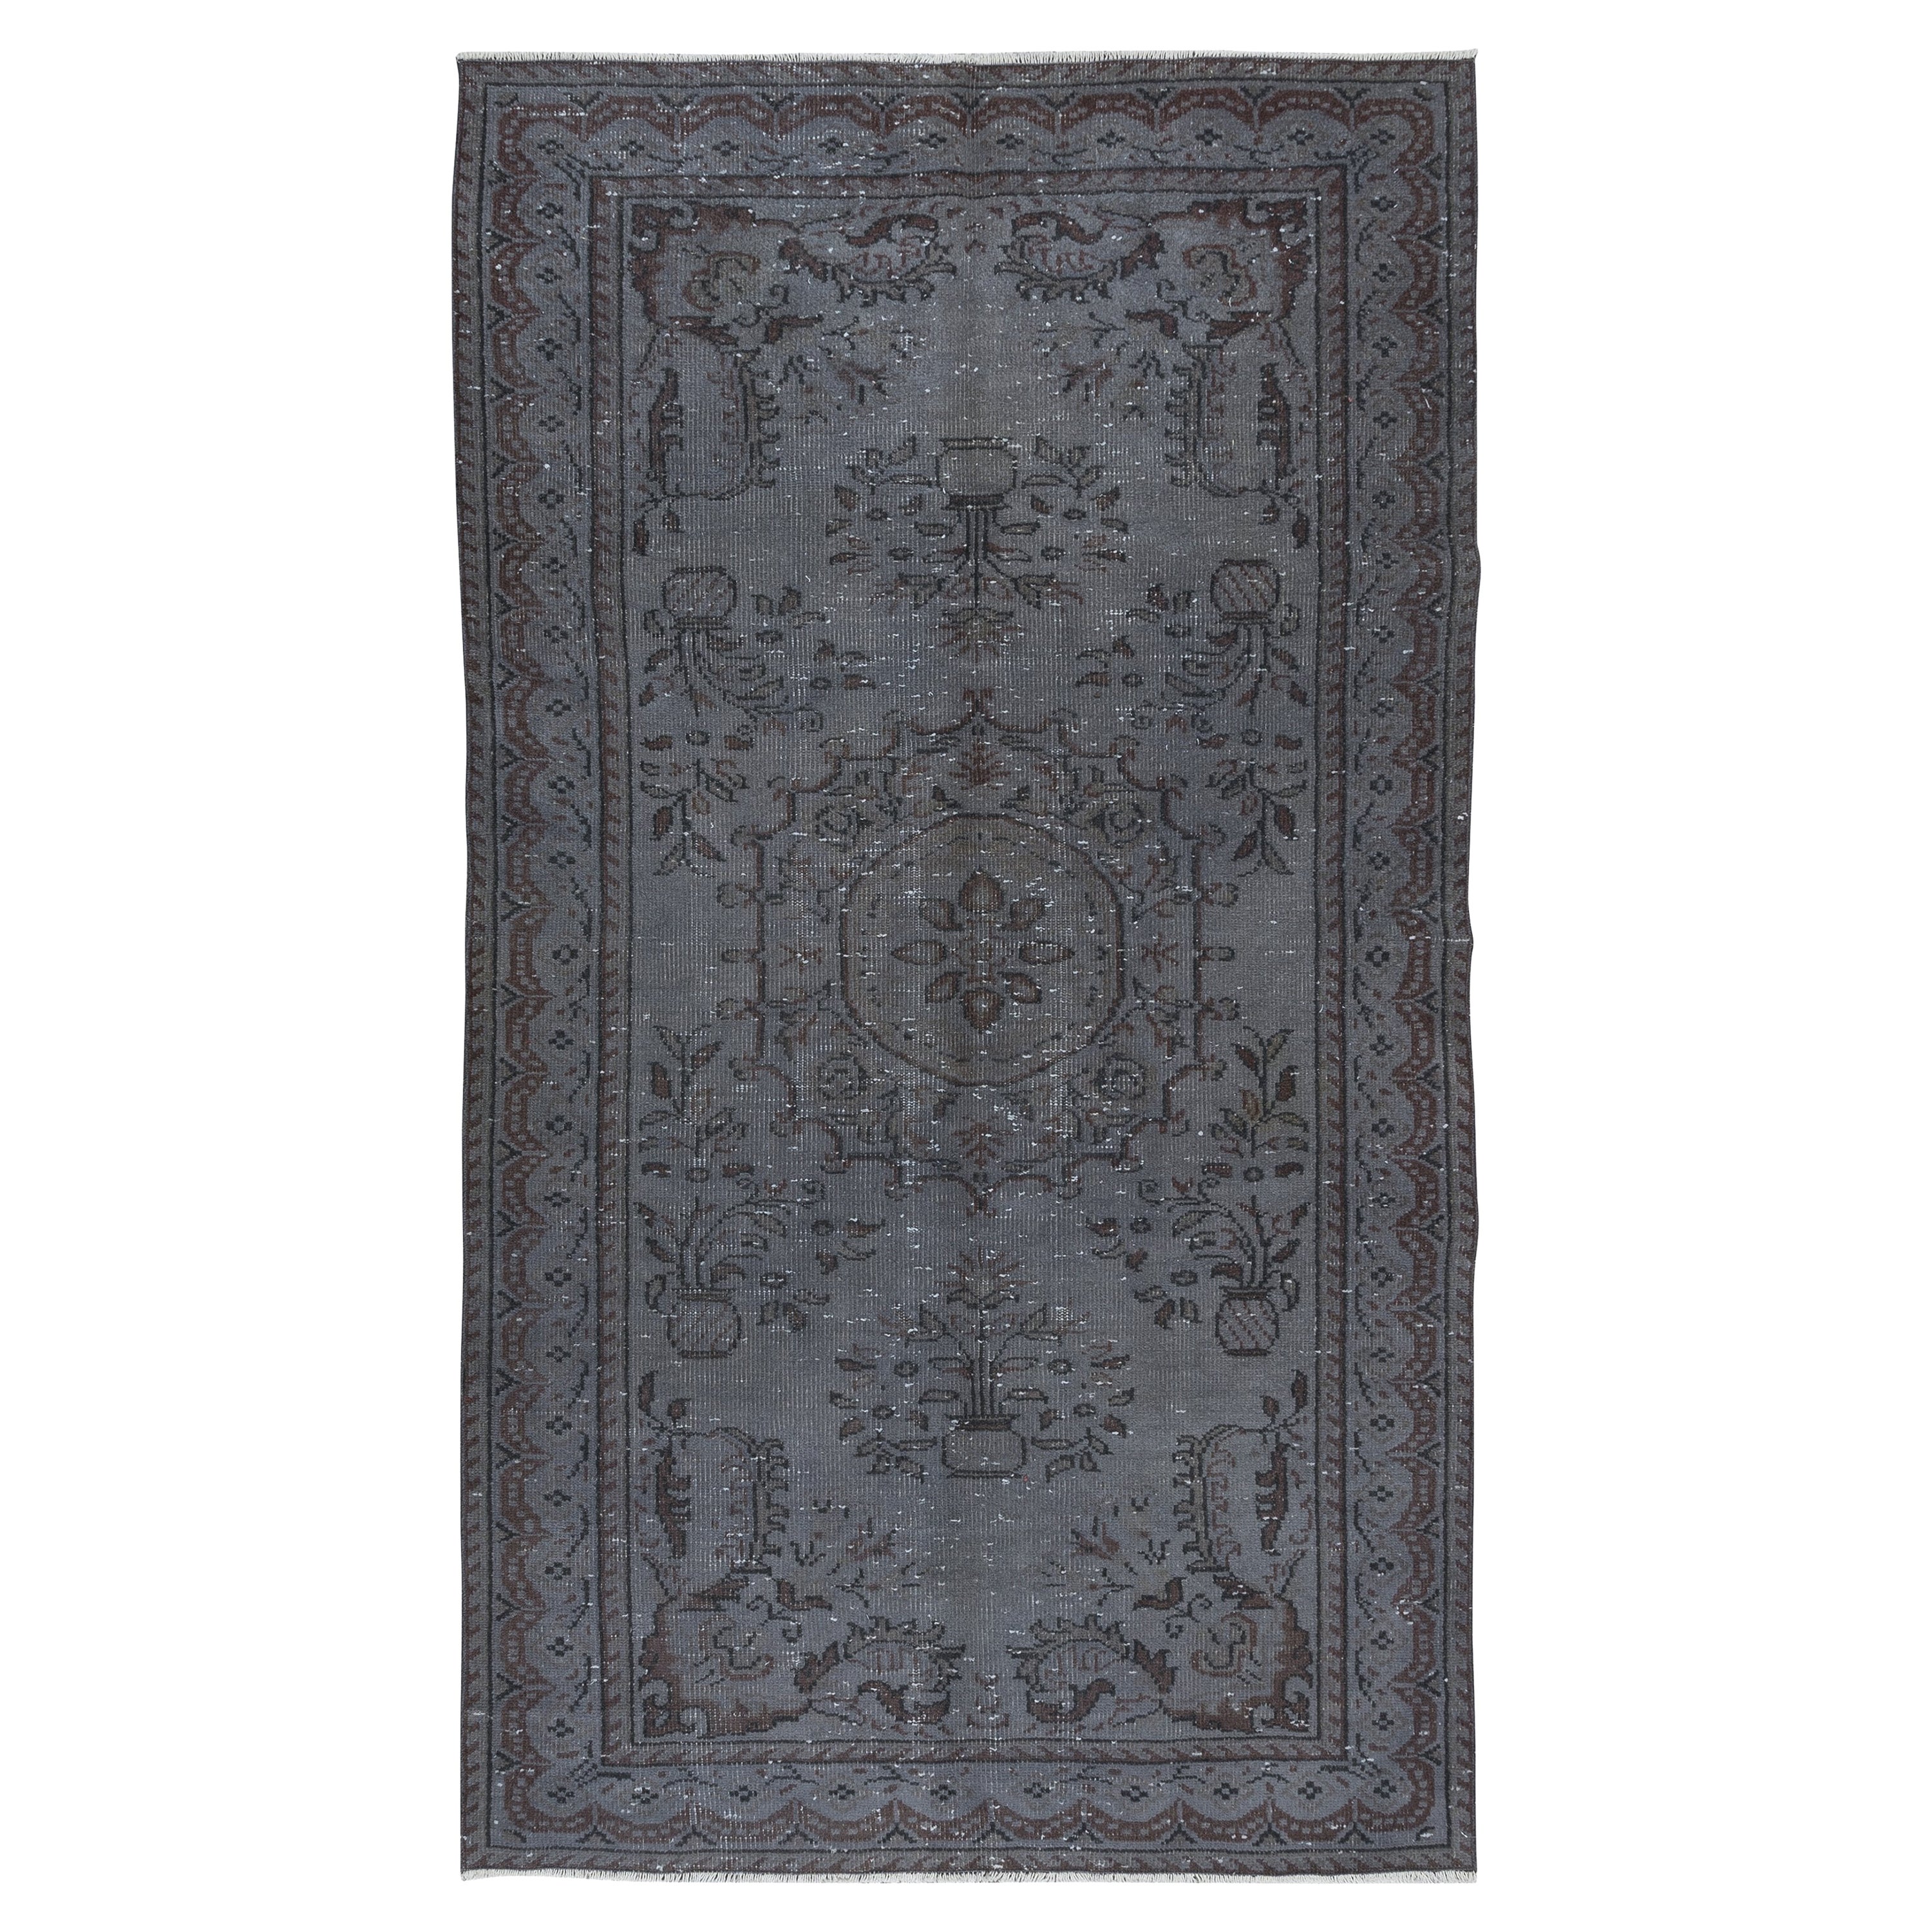 5.2x8.8 Ft Contemporary Handmade Turkish Wool Area Rug in Grey & Brown Tones For Sale